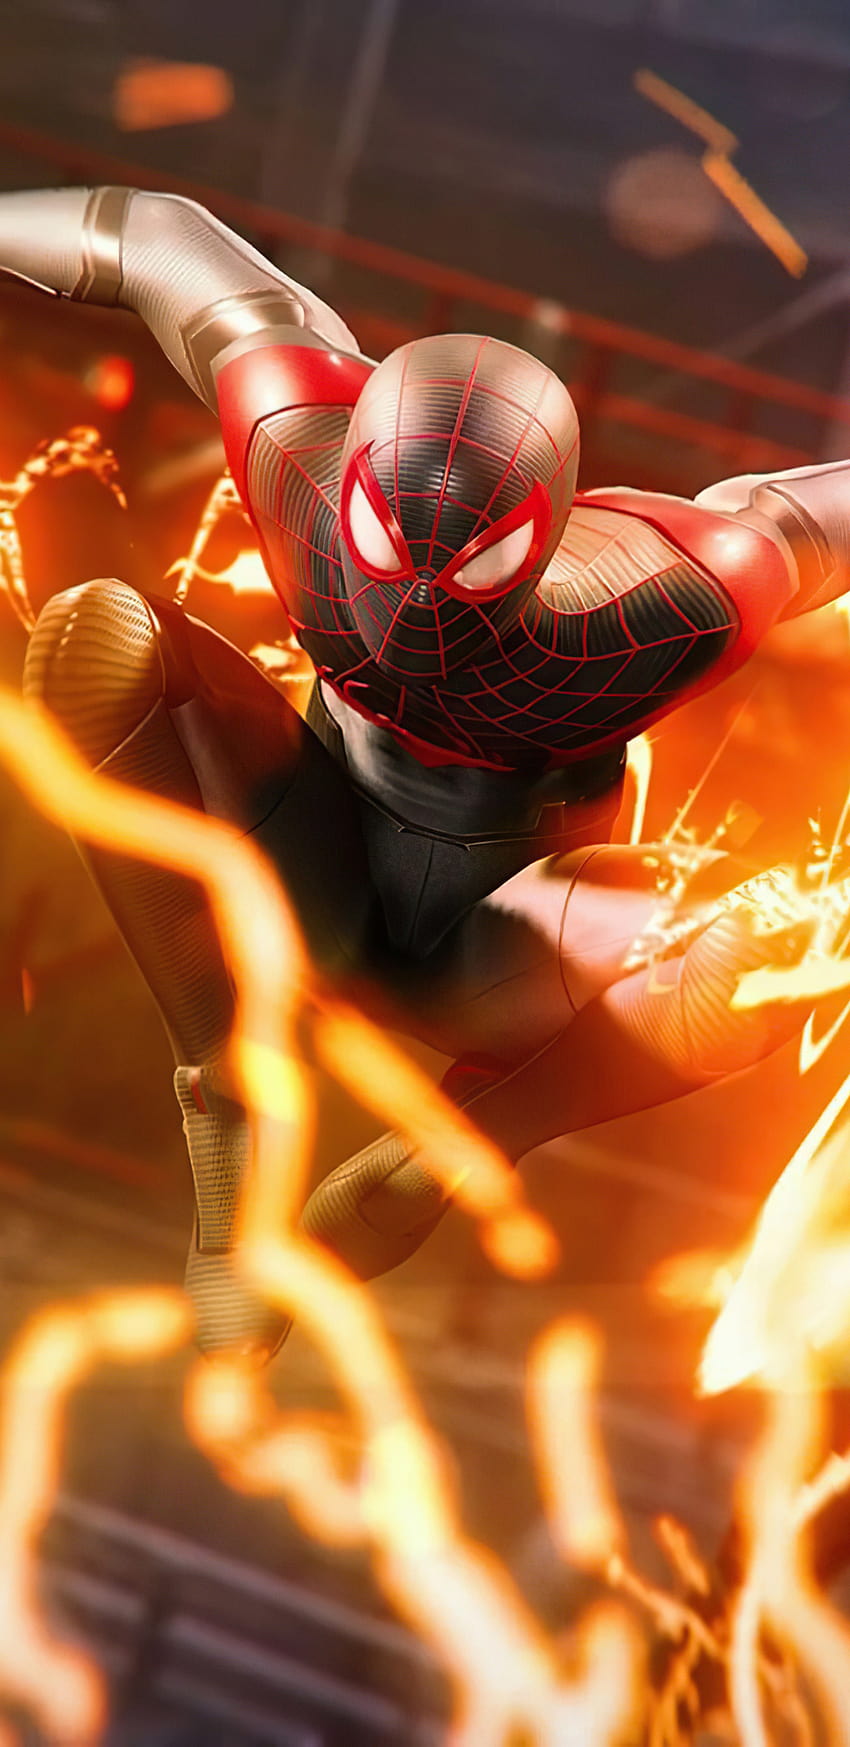 1440x2960 Marvels Spiderman Miles Morales Powers Samsung Galaxy Note 9,8, S9,S8,S Q , Backgrounds, and, orange spider man HD phone wallpaper